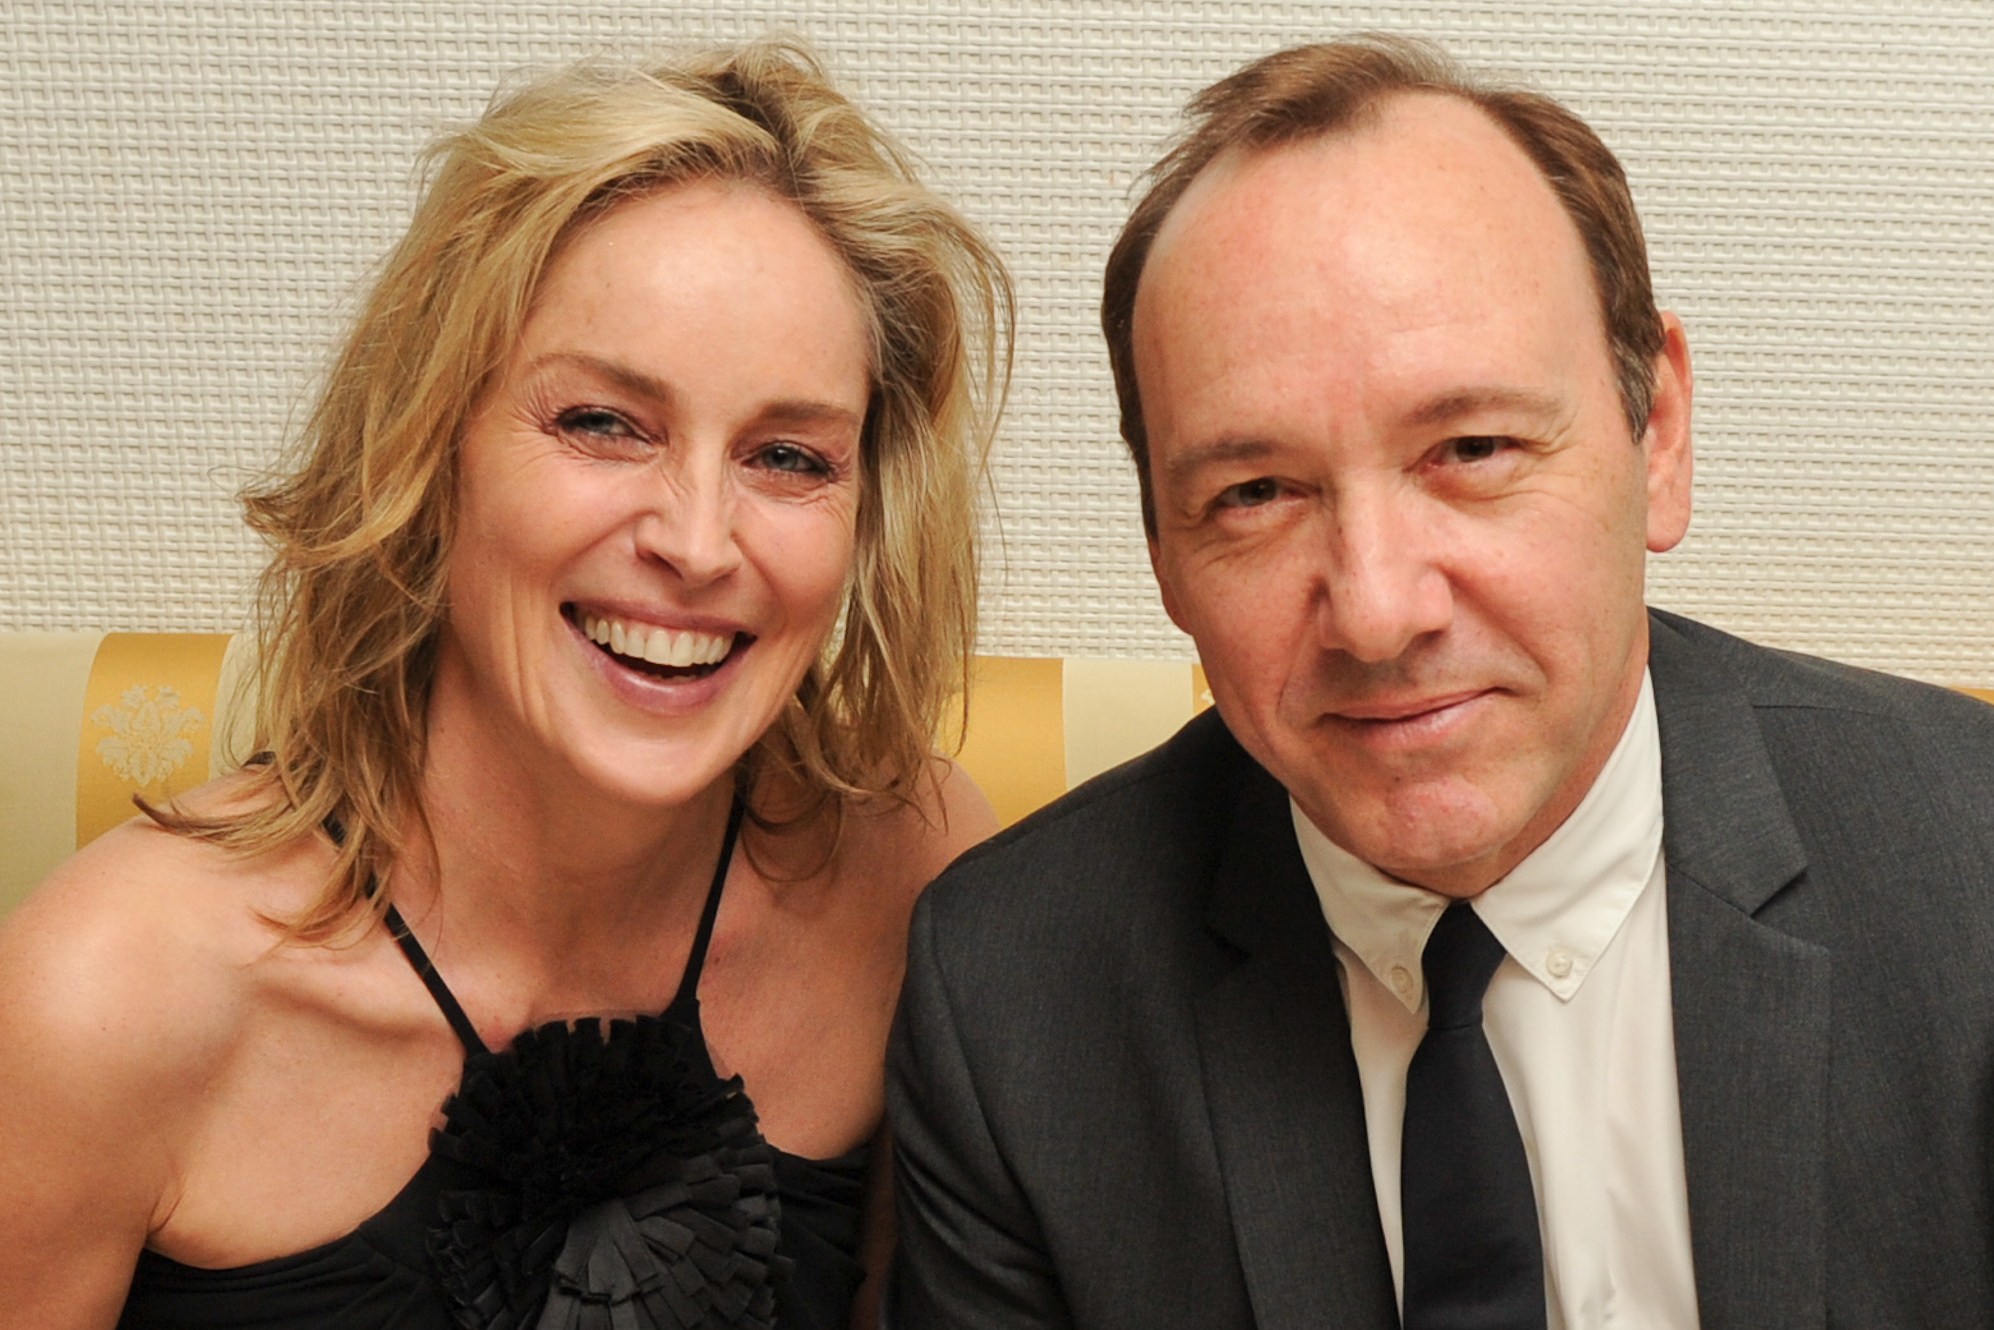 Sharon Stone on Kevin Spacey: “I can’t wait to see Kevin back at work. He is a genius”